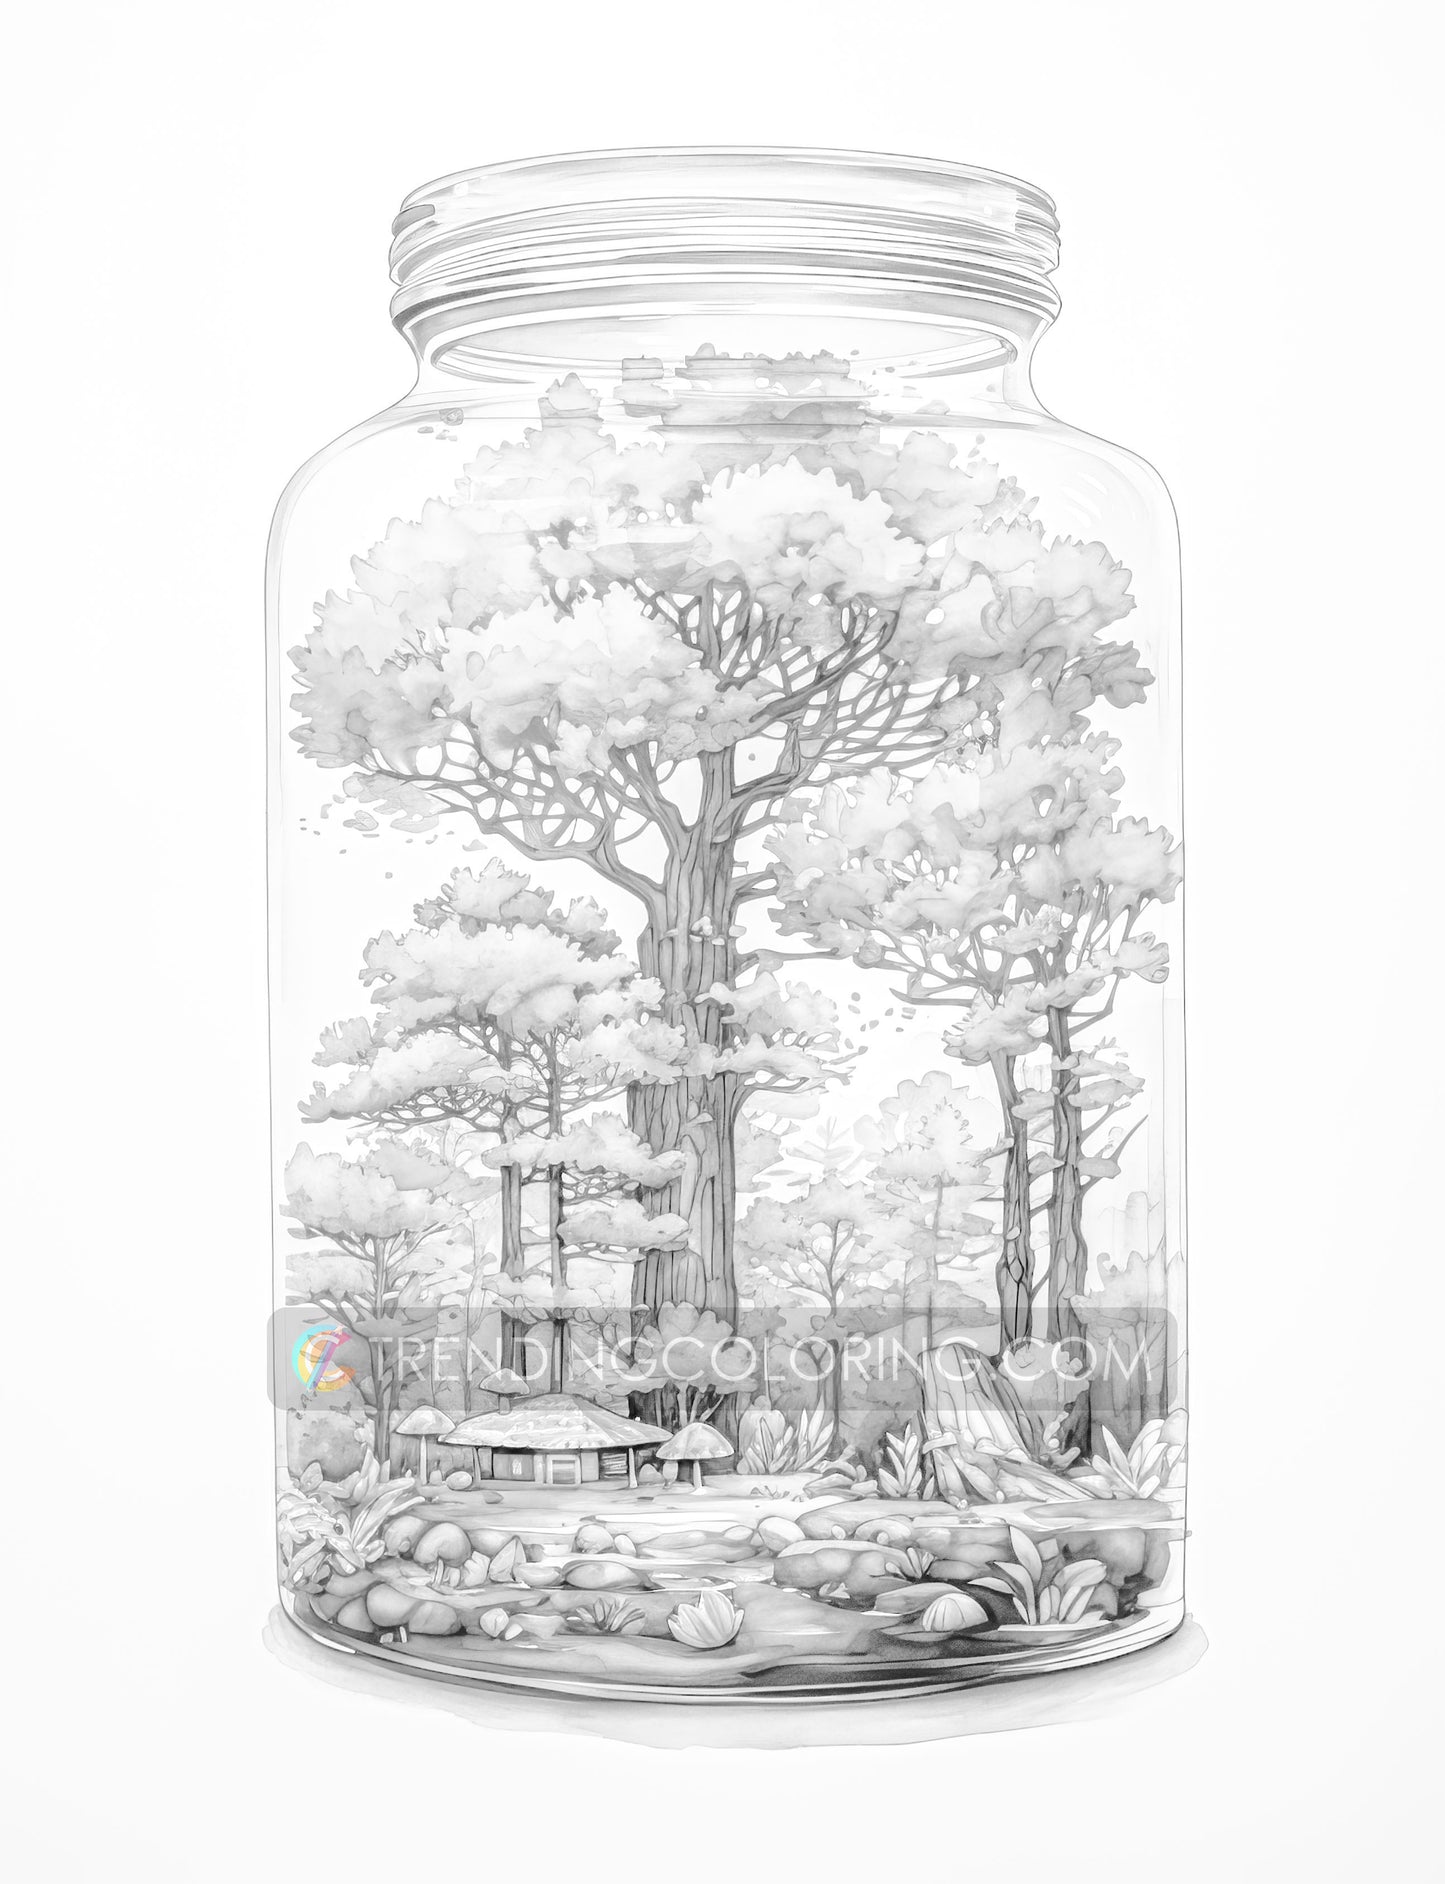 25 Autumn In Jar Grayscale Coloring Pages  - Instant Download - Printable Dark/Light